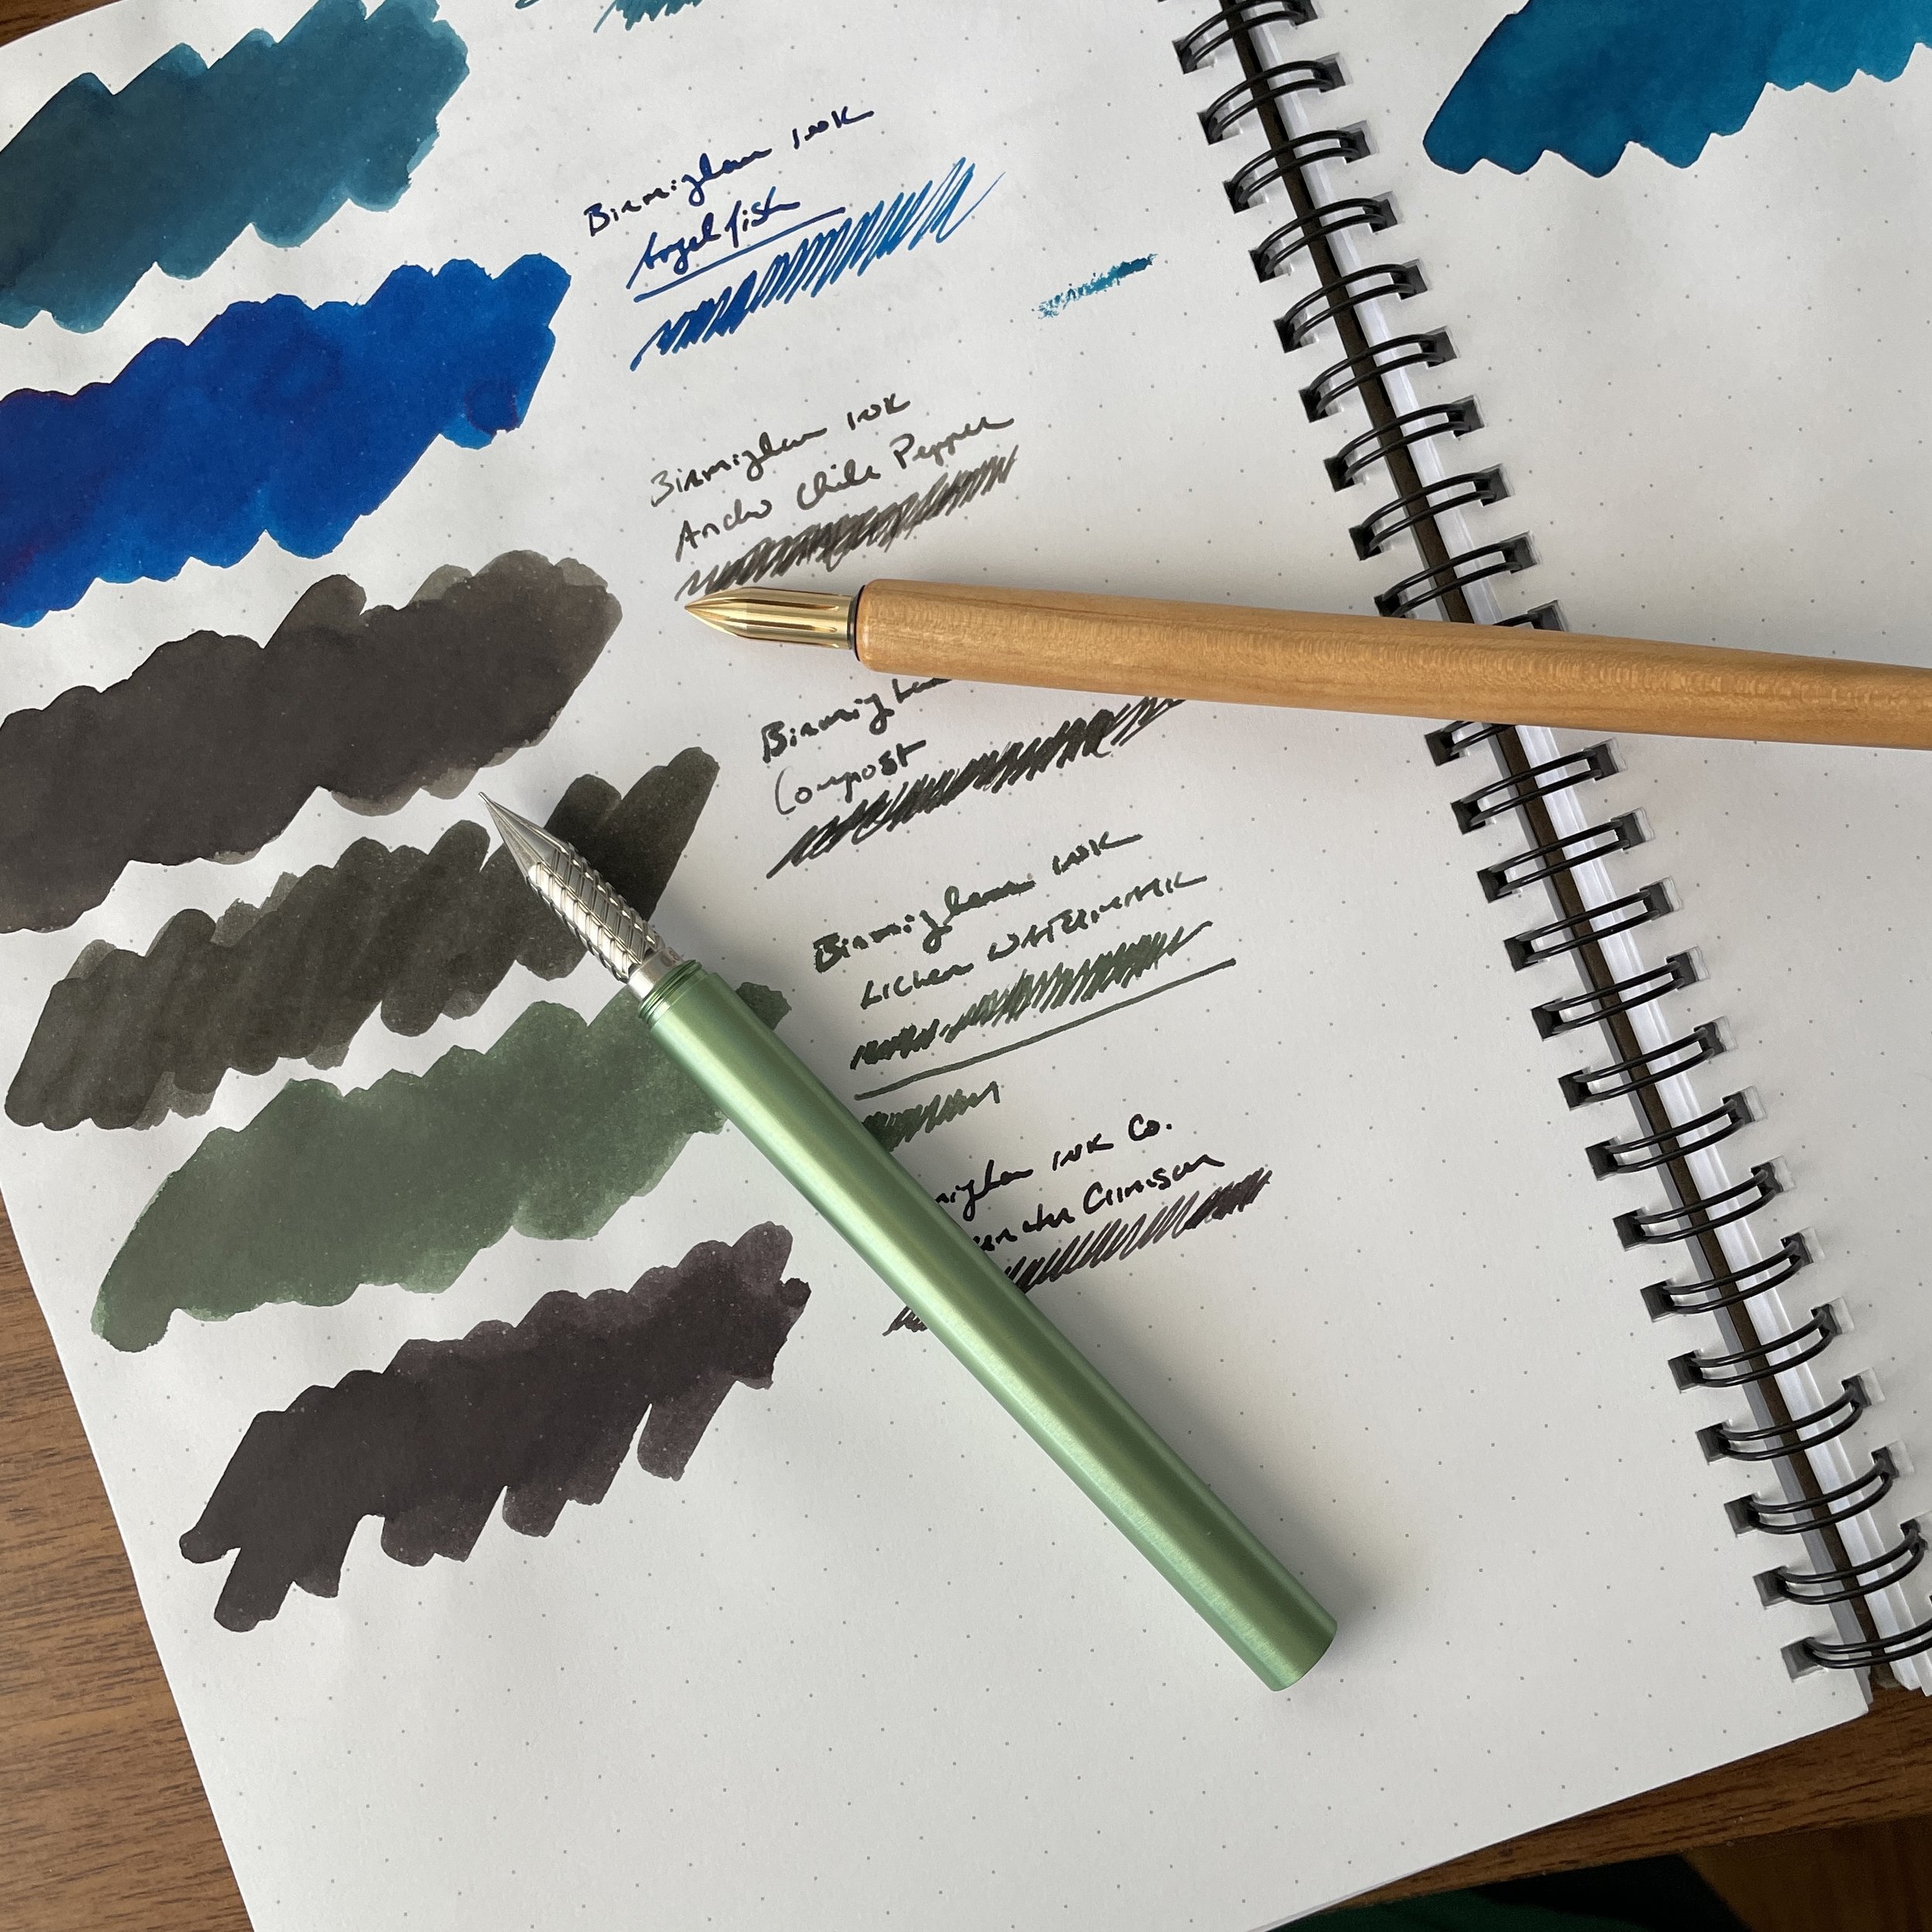 What Are The Best Fountain Pen Inks For Bullet Journaling?